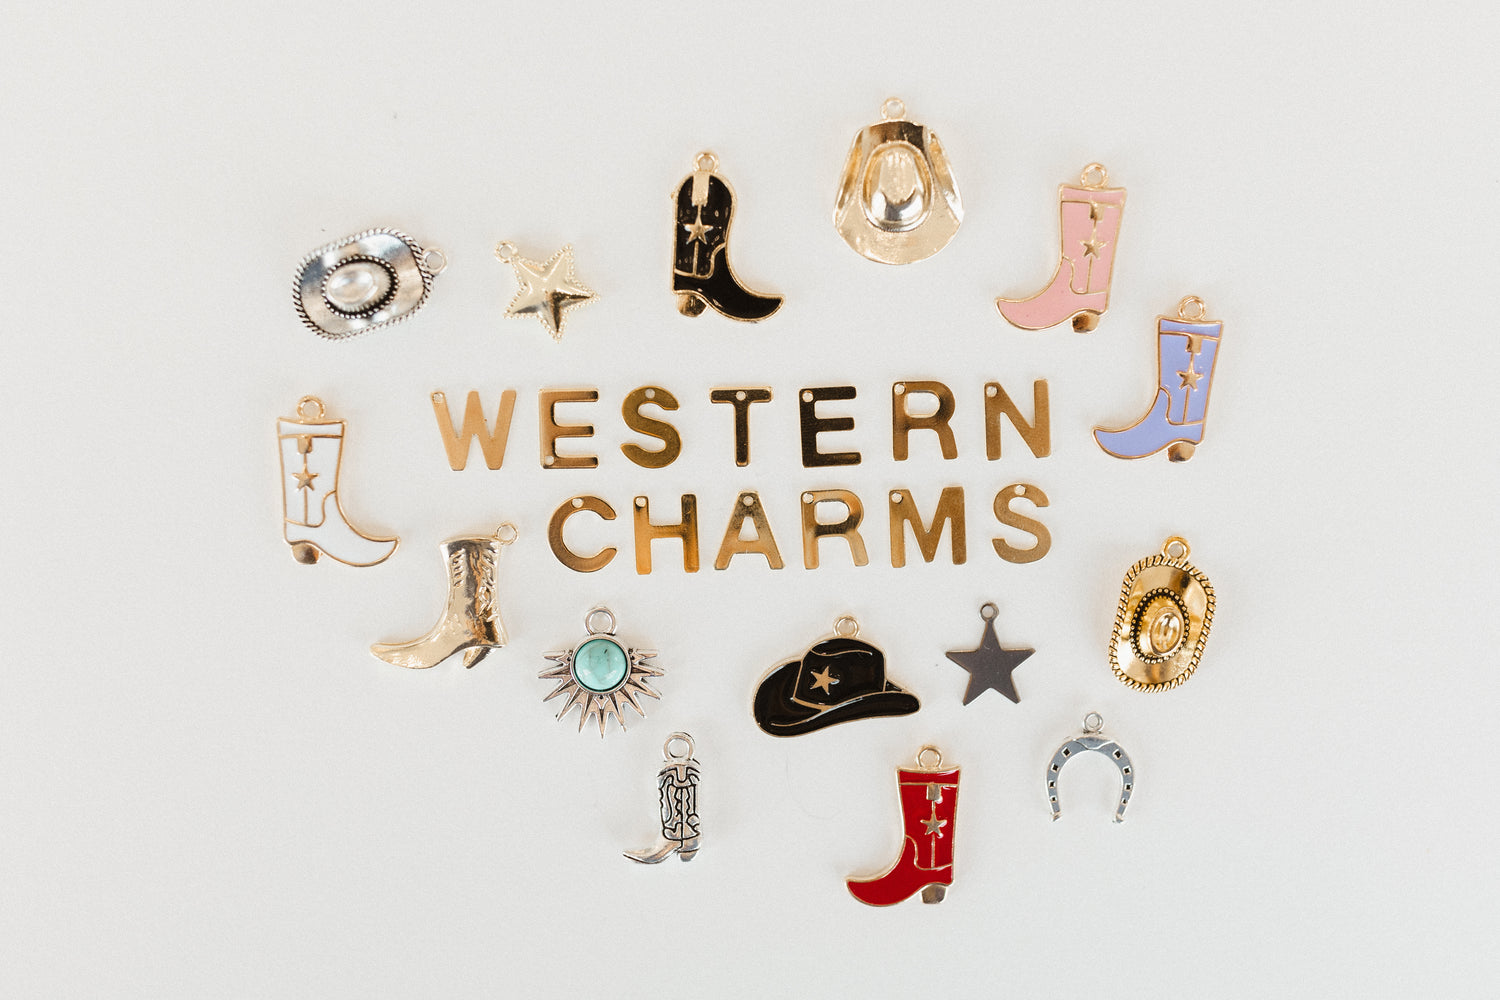 Western charms